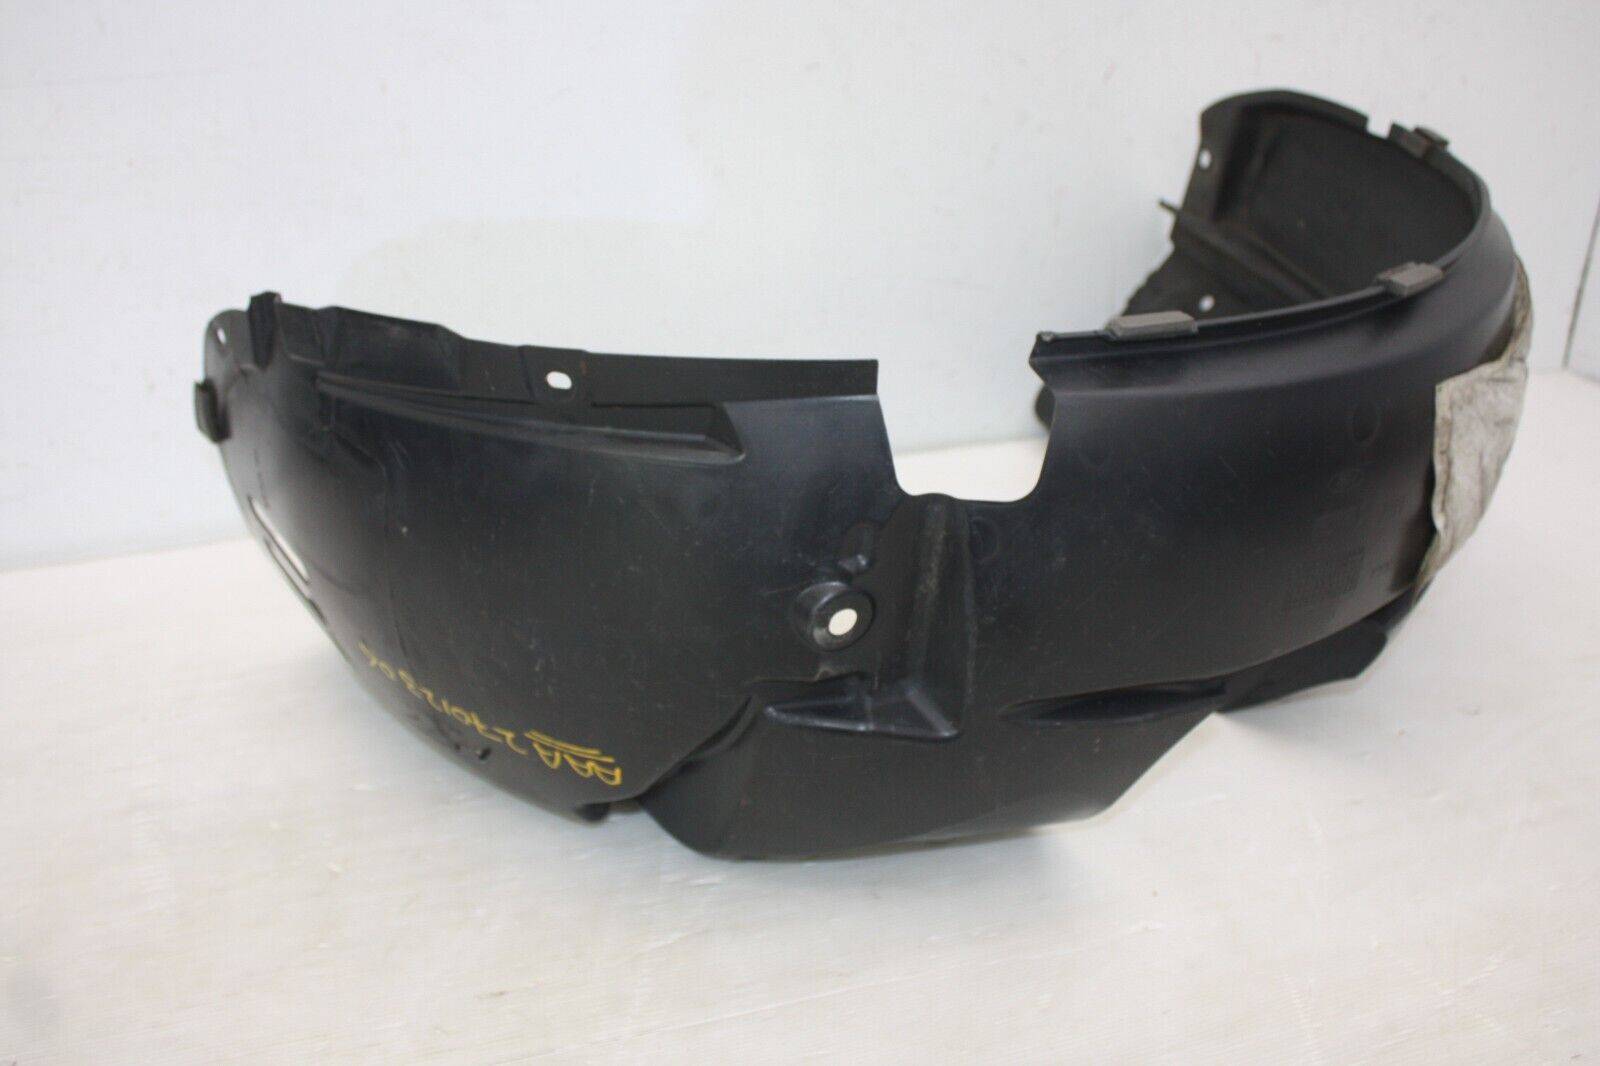 Ford-Fiesta-Front-Right-Side-Wheel-Liner-Splash-Guard-2008-to-2012-8A61-16114-B-175656992480-9